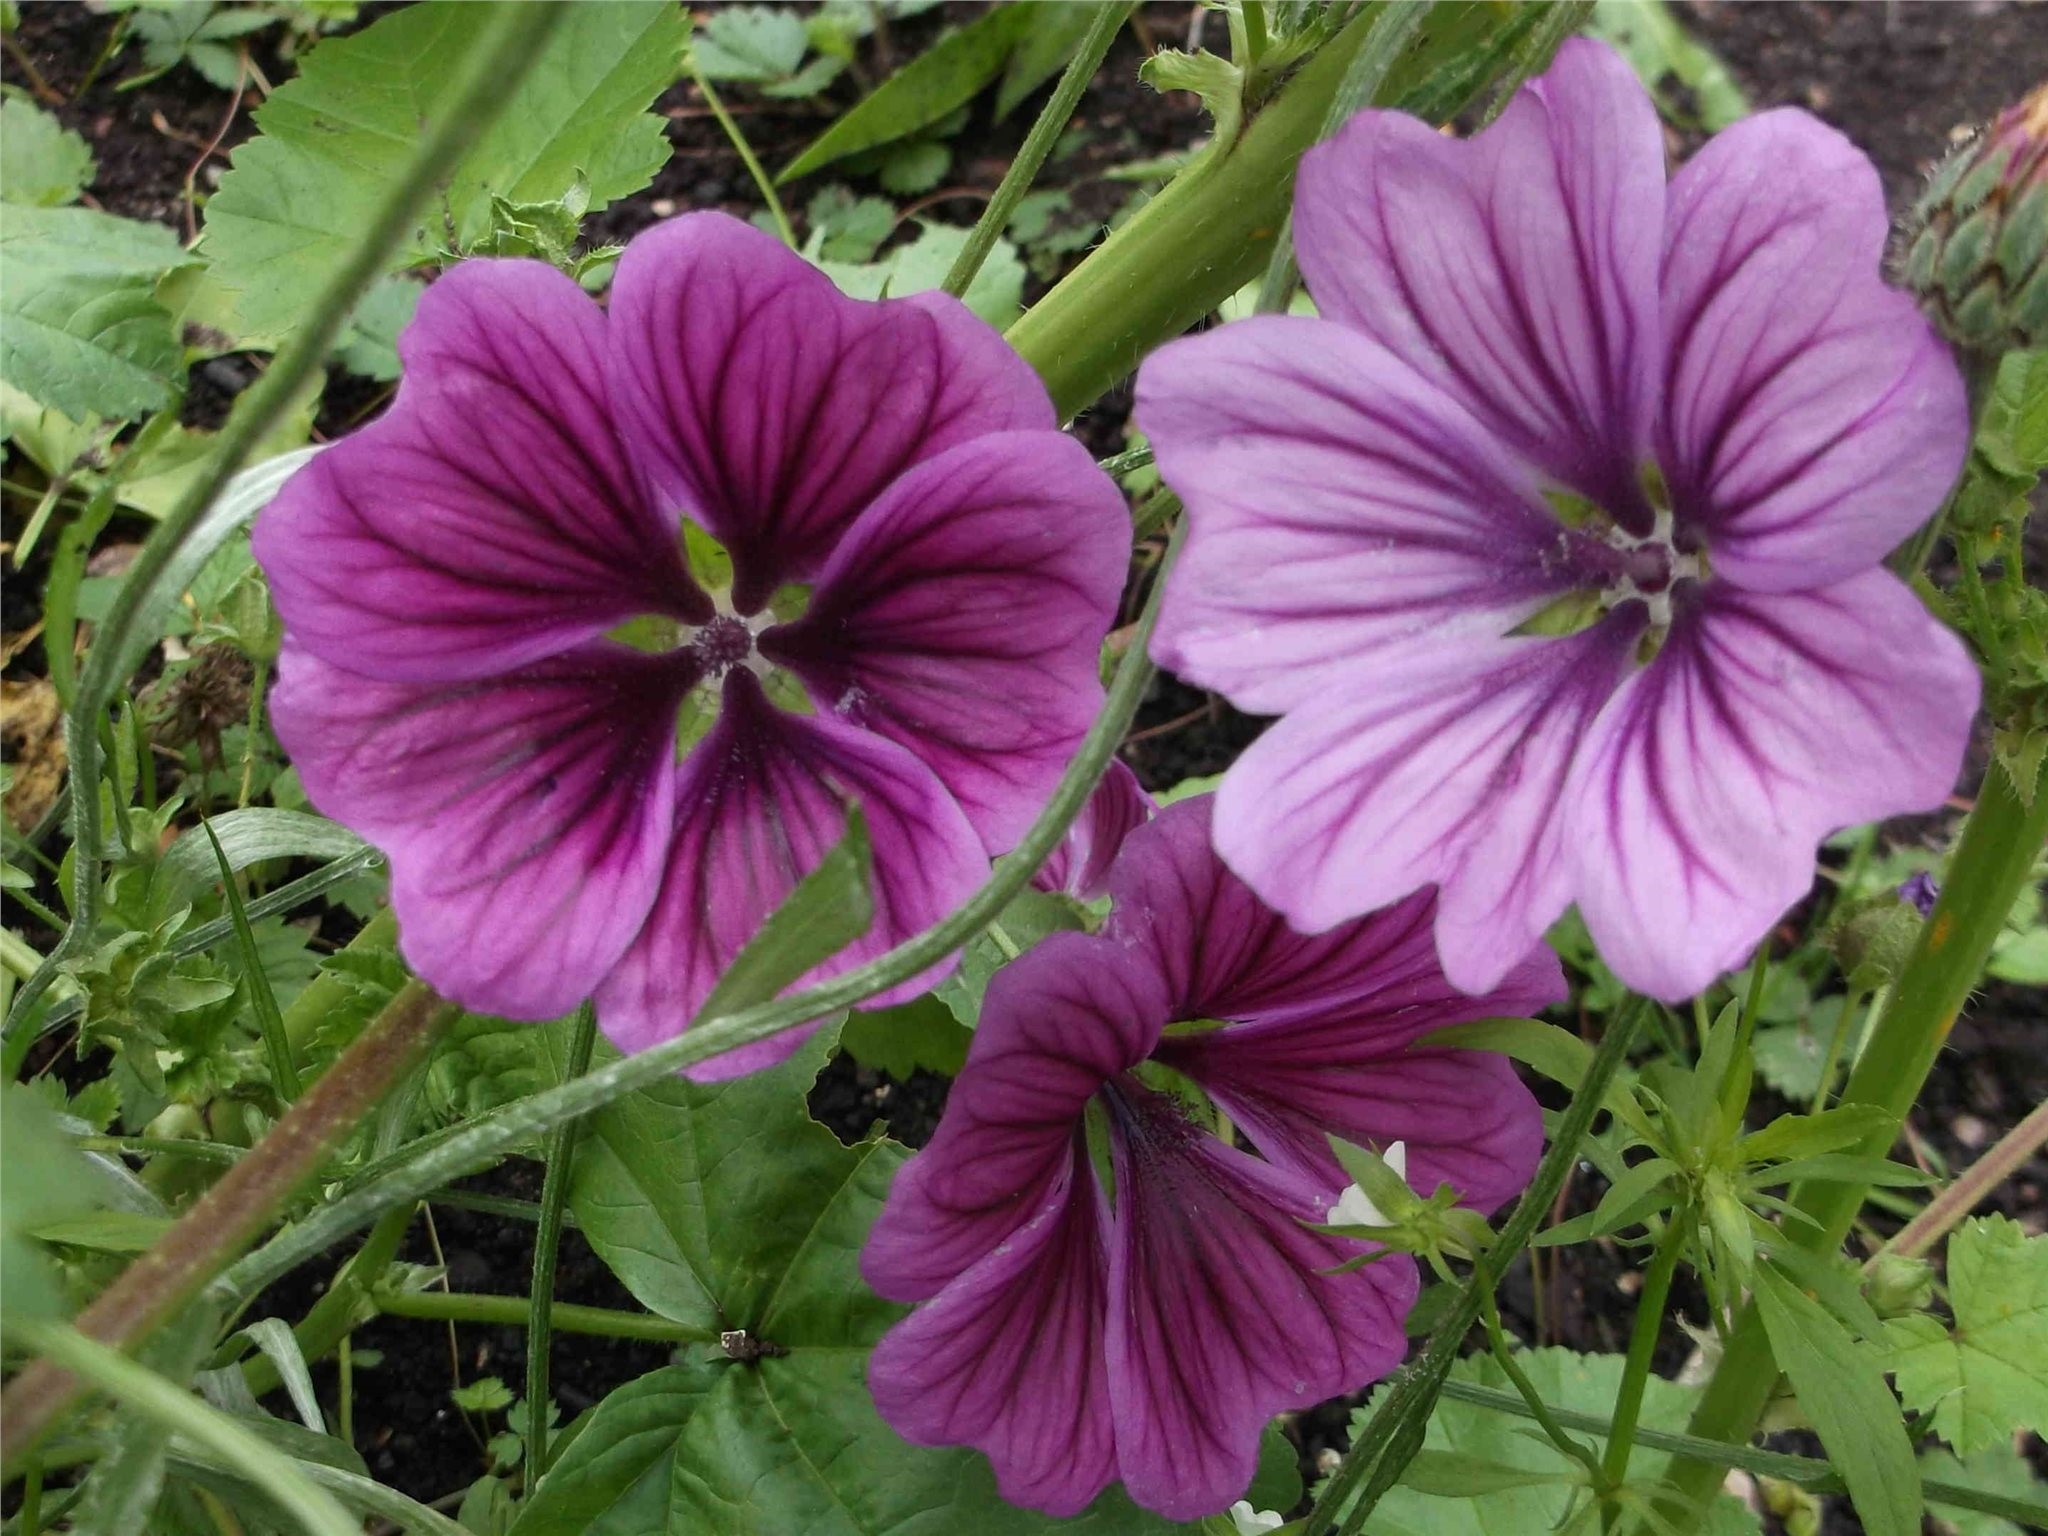 Malva Zebrina
	HARDY PERENNIAL/BIENNIAL
	STATELY PLANT
	LOVED BY BEES
	COTTAGE GARDEN FAVOURITE
	STUNNING FLOWER COLOUR
